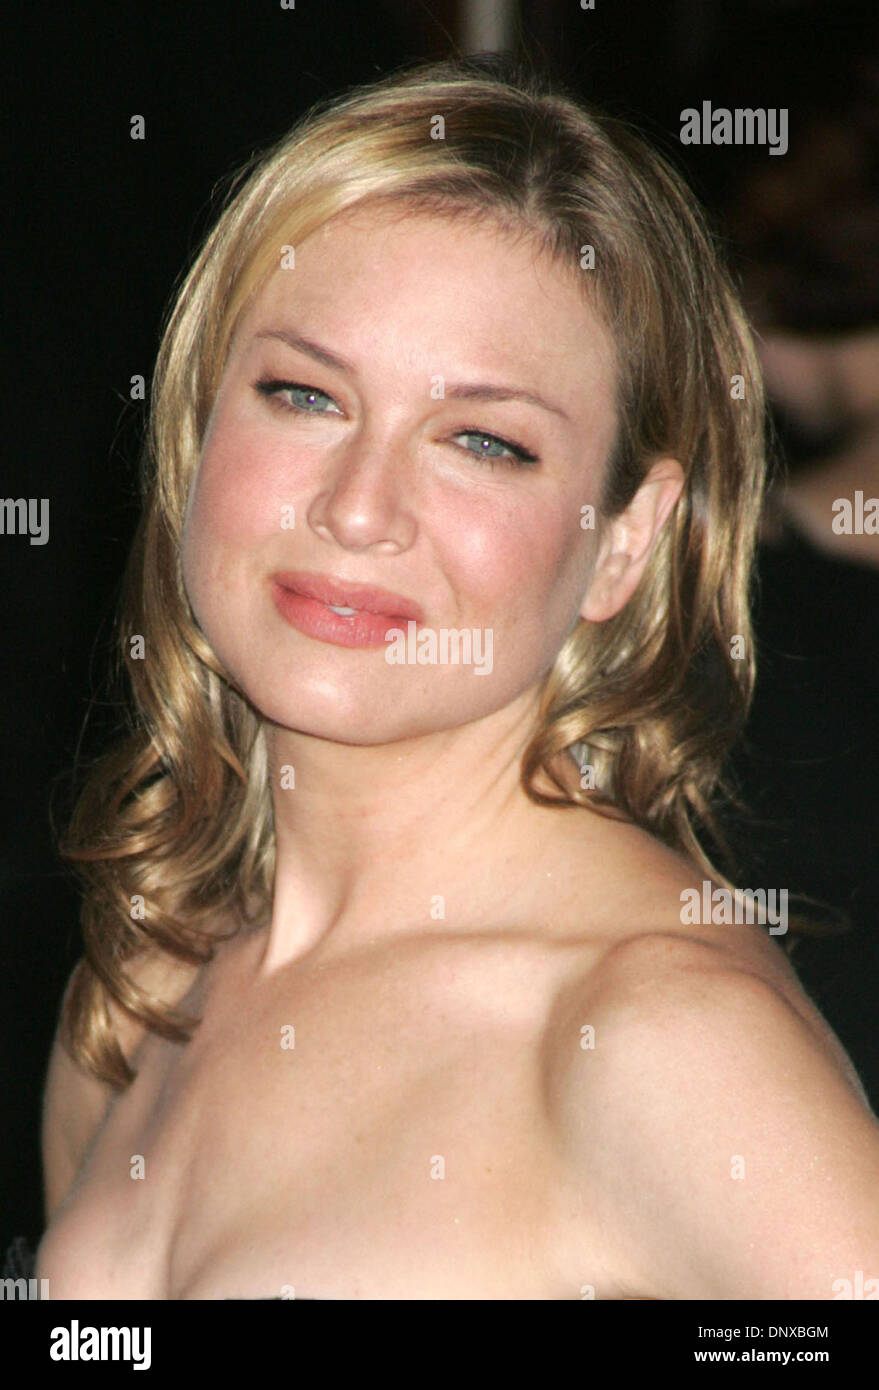 Dec 04, 2005; New York, NY, USA; Actress RENEE ZELLWEGER at the Museum of the Moving Image Salute to Ron Howard held at the Waldorf-Astoria Hotel. Mandatory Credit: Photo by Nancy Kaszerman/ZUMA Press. (©) Copyright 2005 by Nancy Kaszerman Stock Photo